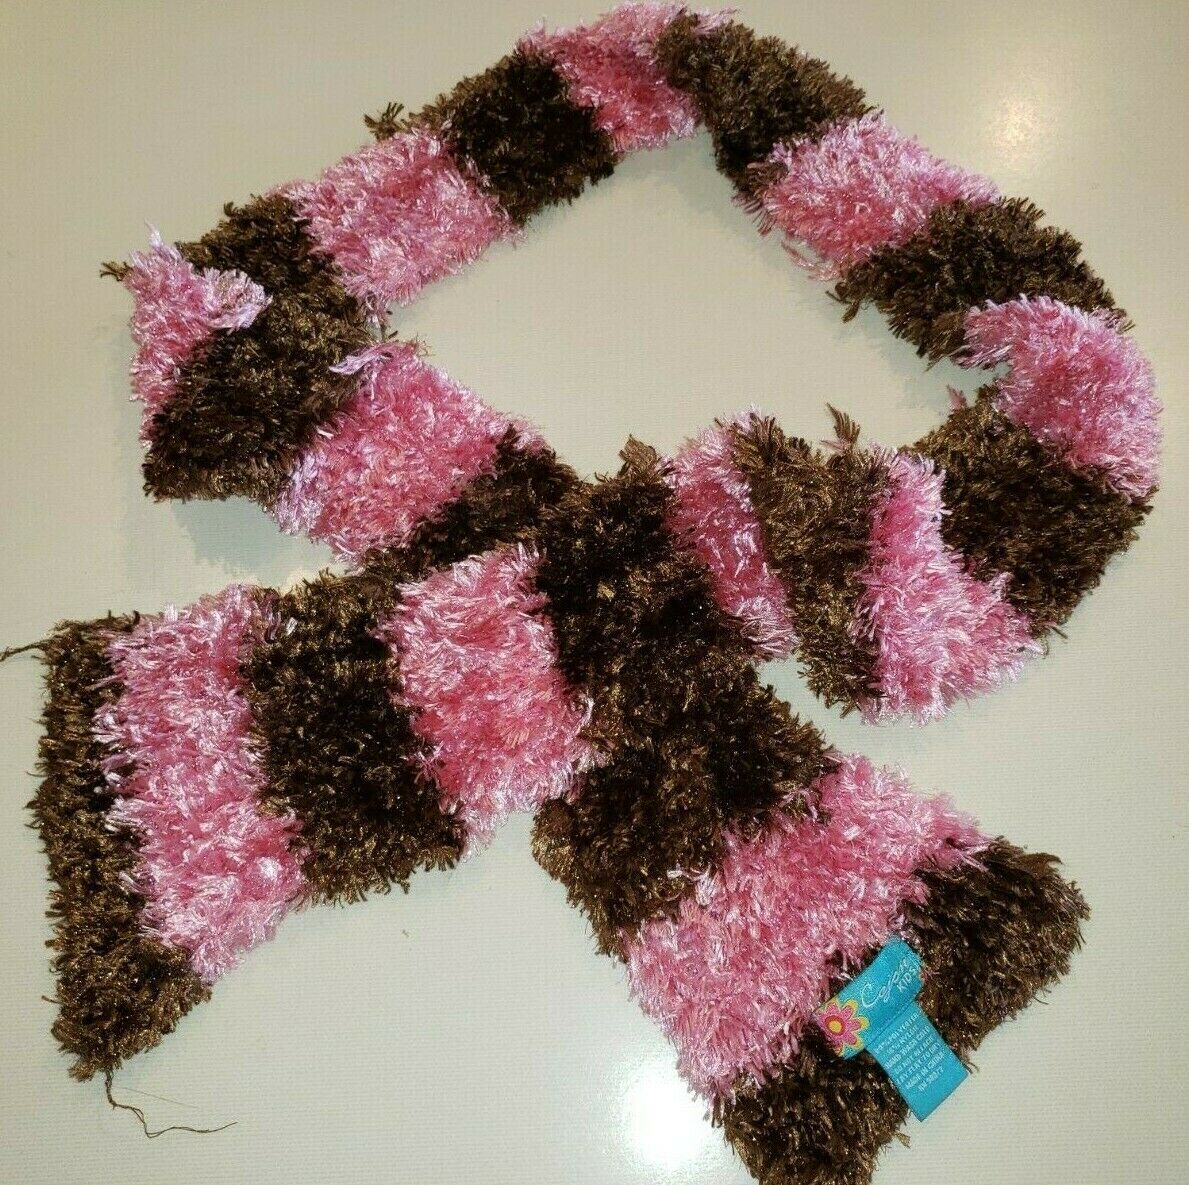 Cejon Girls Winter Scarf Pink Brown Broad Stripes One Size Fits Most Stretchy @@